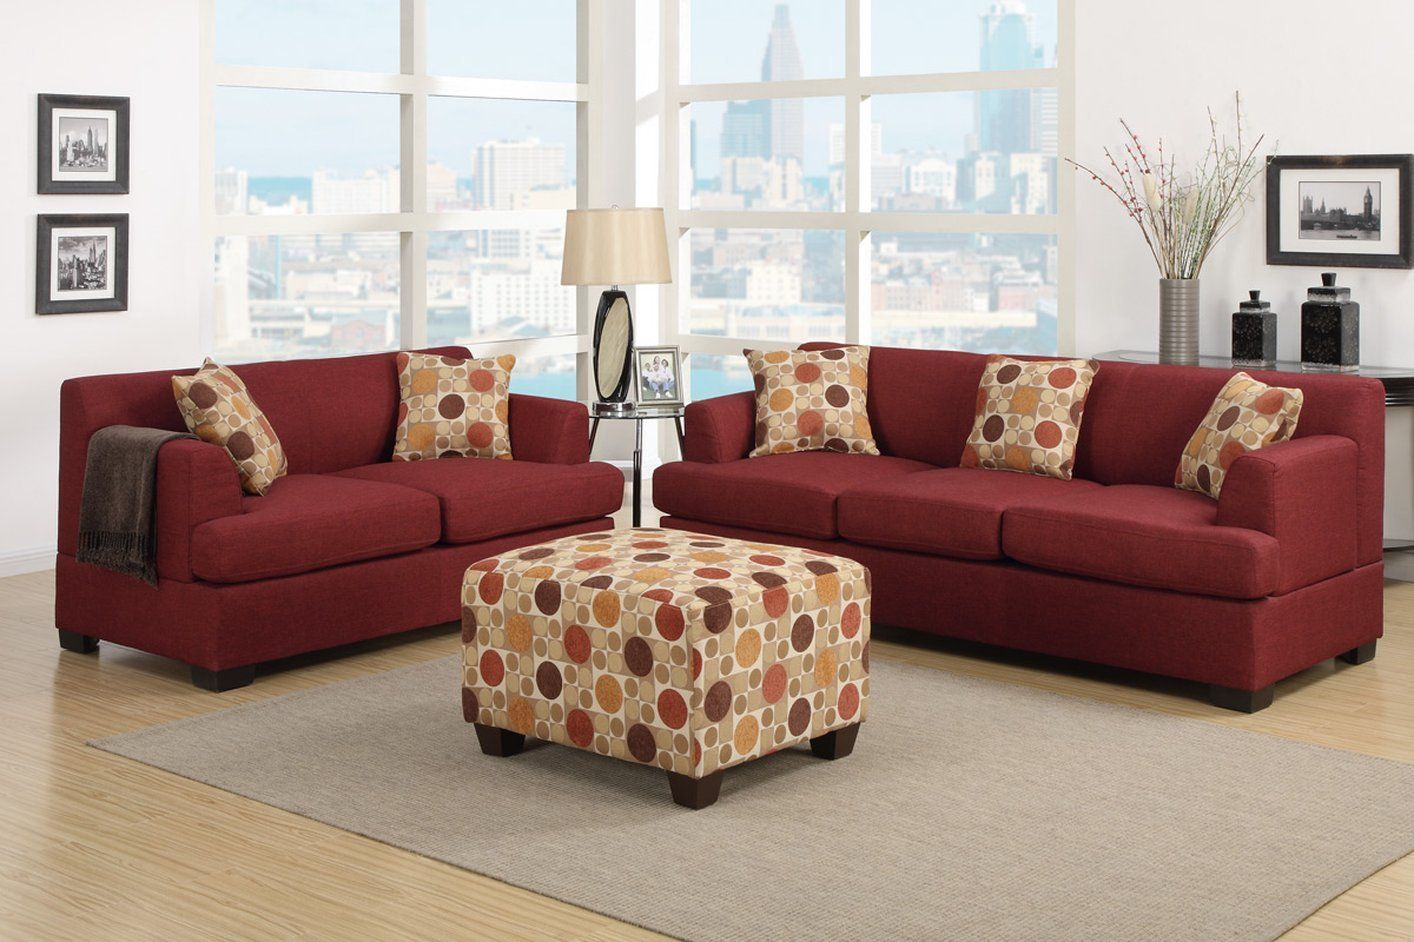 Poundex Montreal Iv F7963 Red Fabric Sofa – Steal A Sofa Inside Red Sofa Chairs (View 14 of 15)